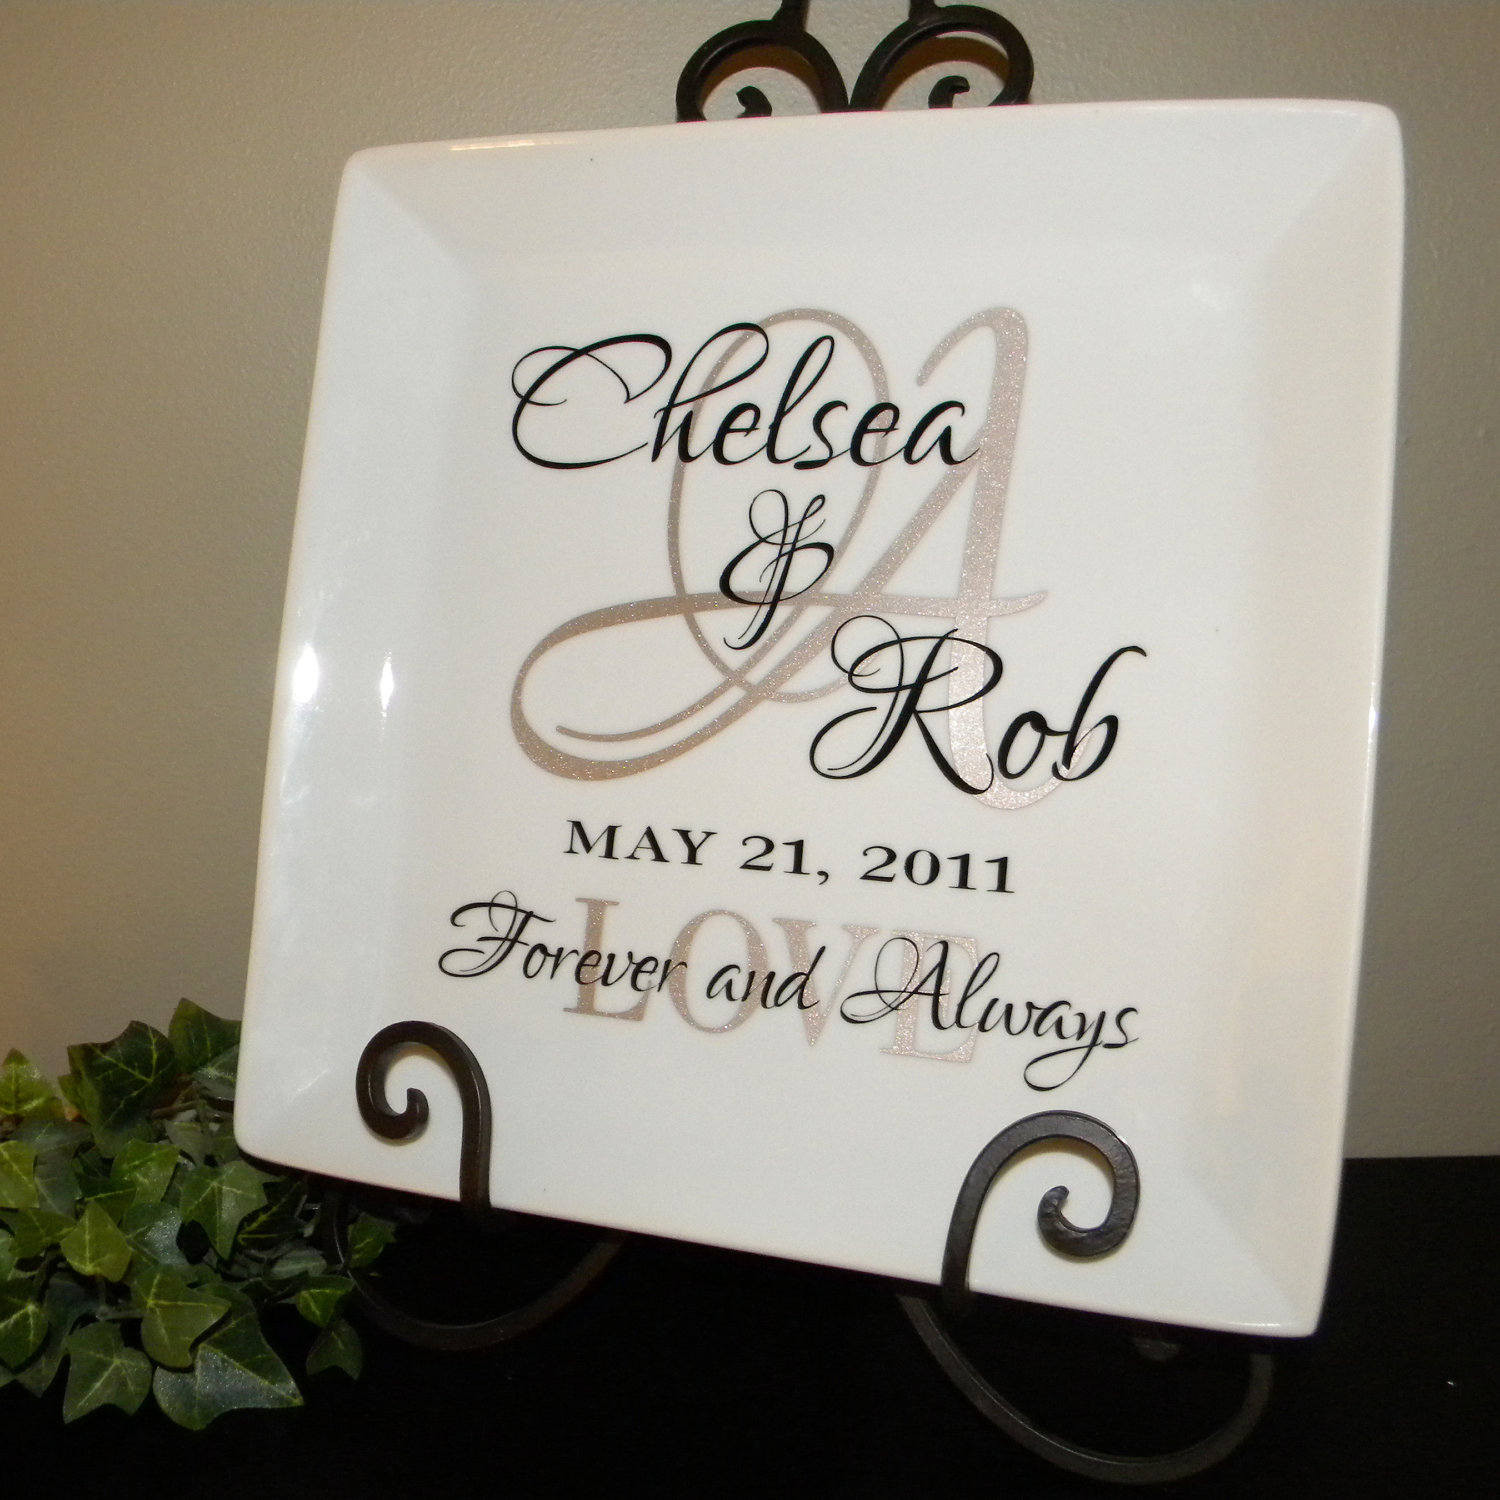 Wedding Photo Gift Ideas
 Personalized Wedding Gift Plate Anniversary Gift For Couple